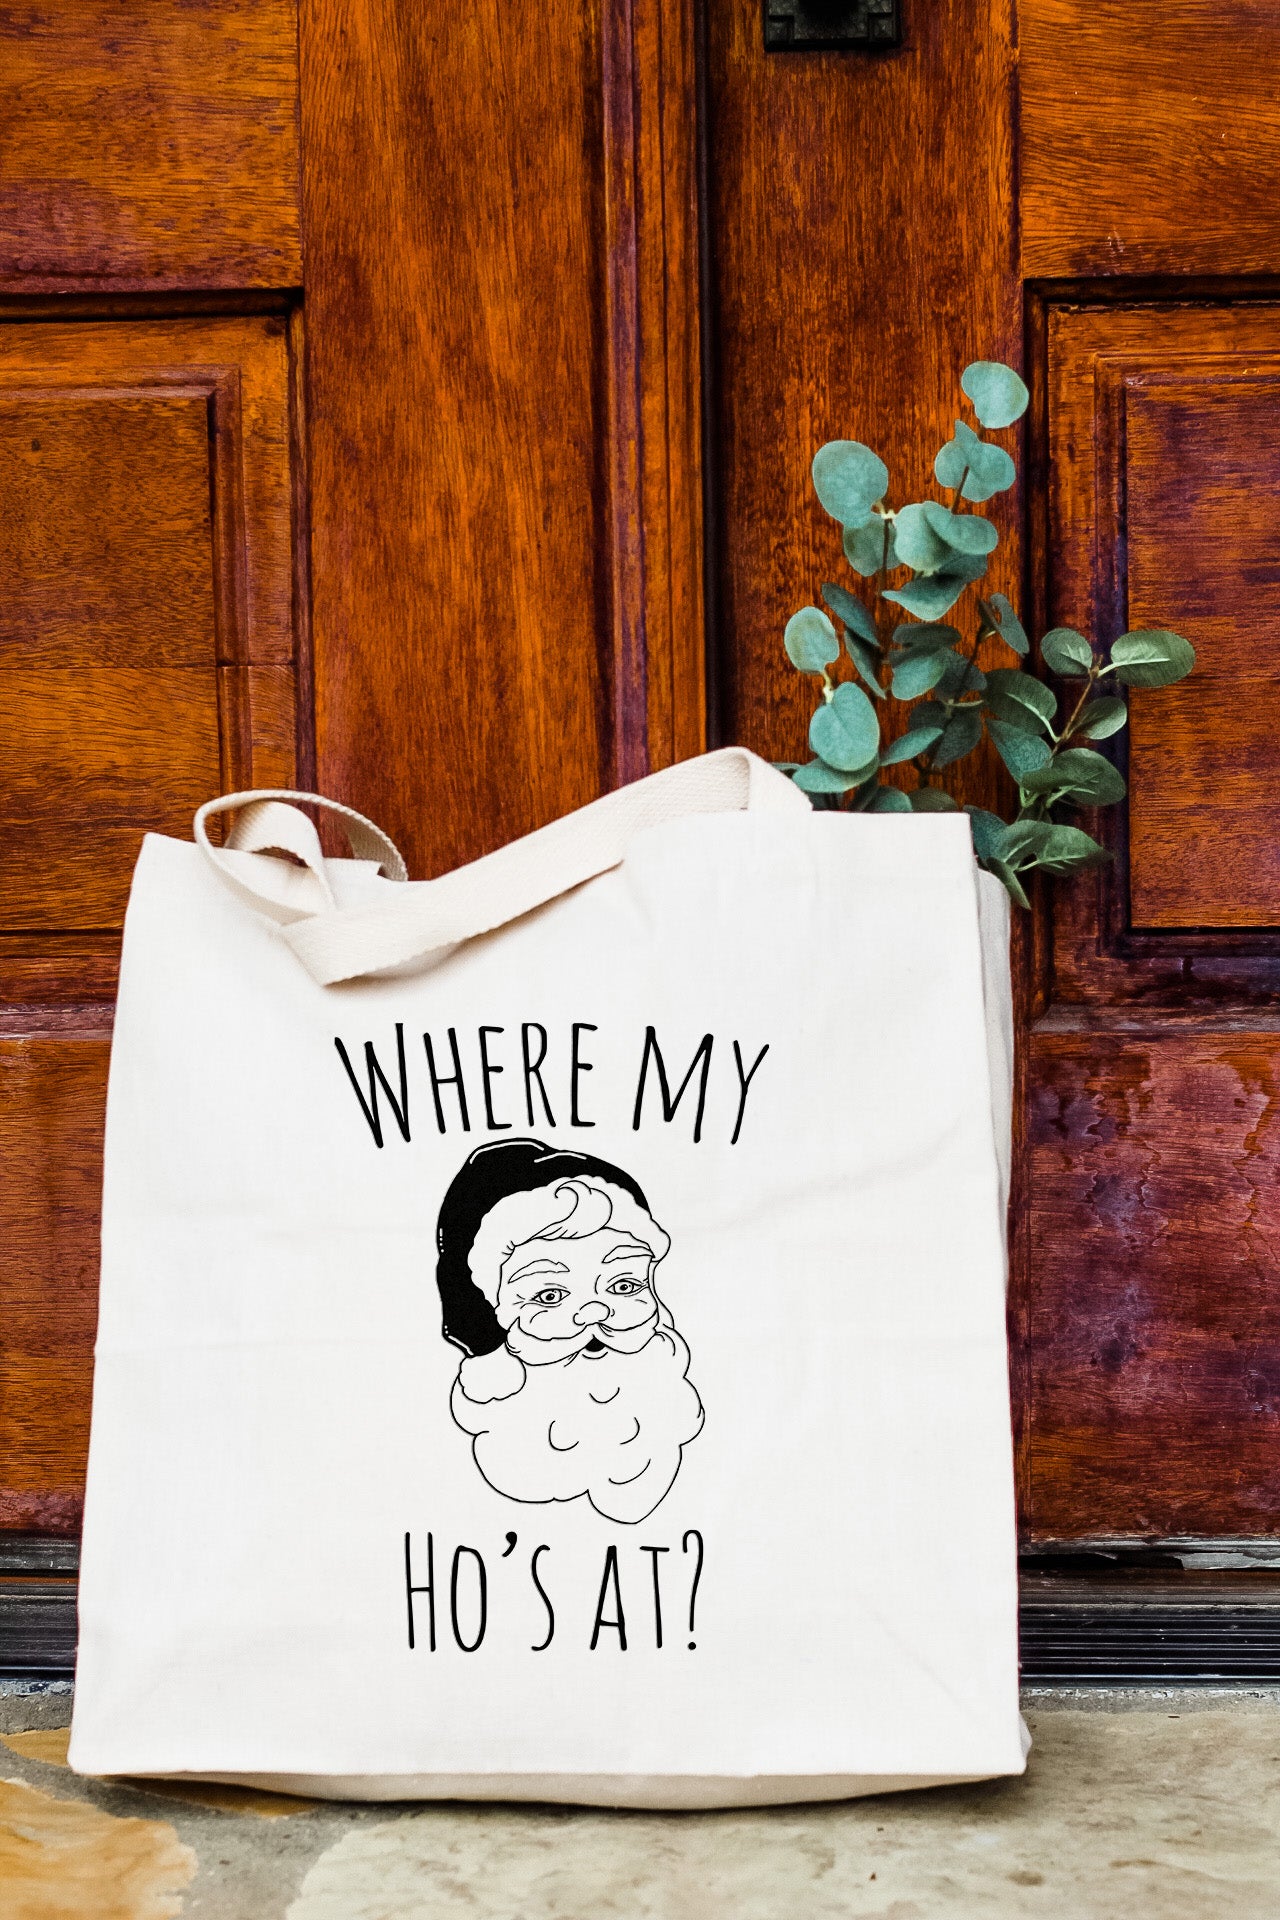 Where My Ho's At? - Tote Bag - MoonlightMakers